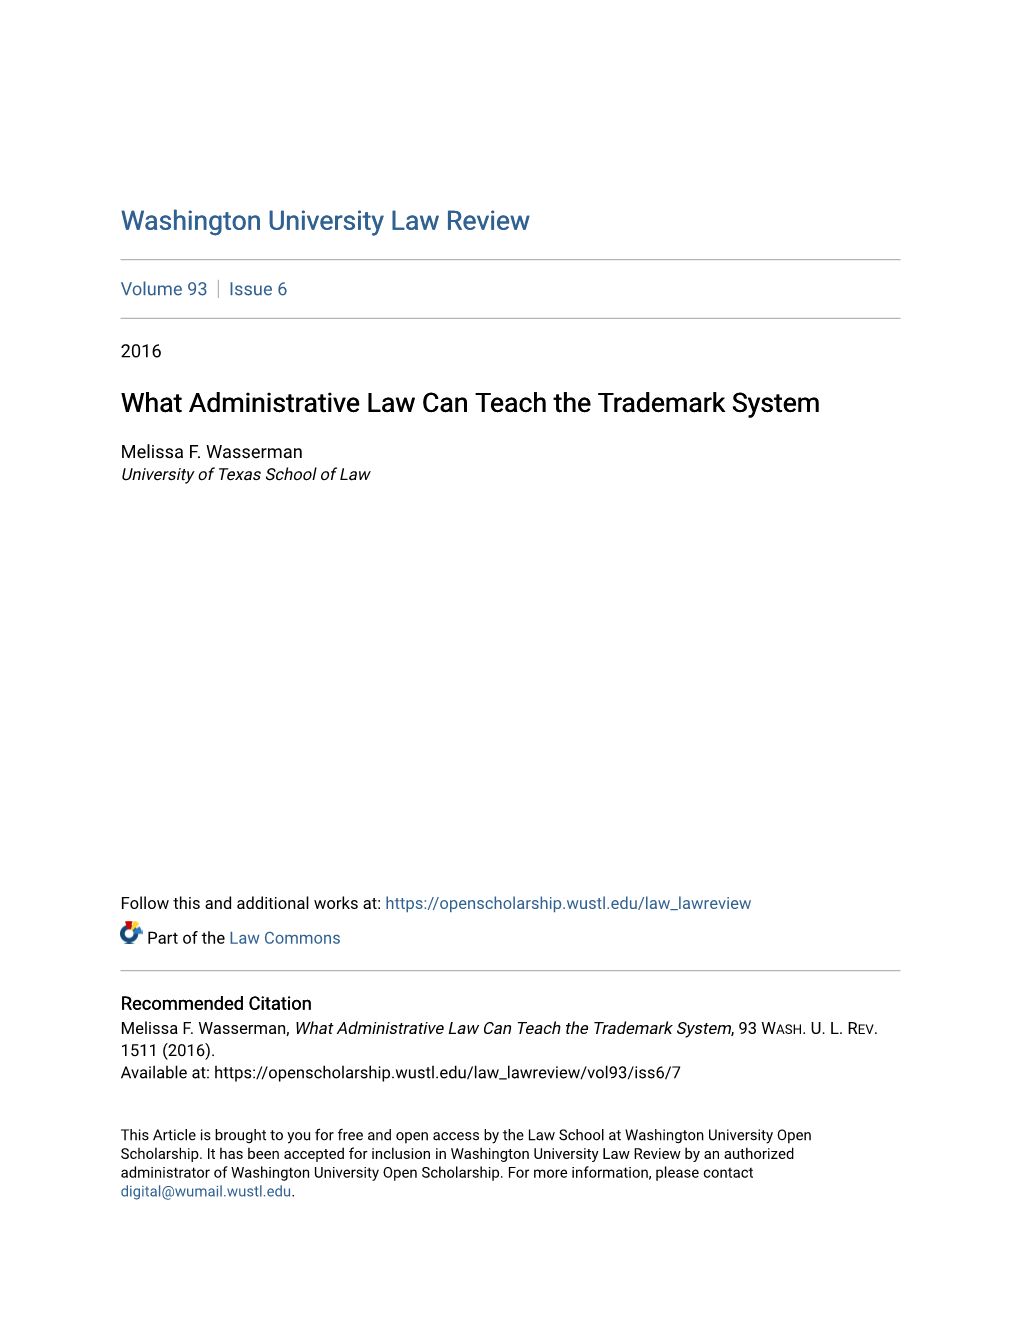 What Administrative Law Can Teach the Trademark System